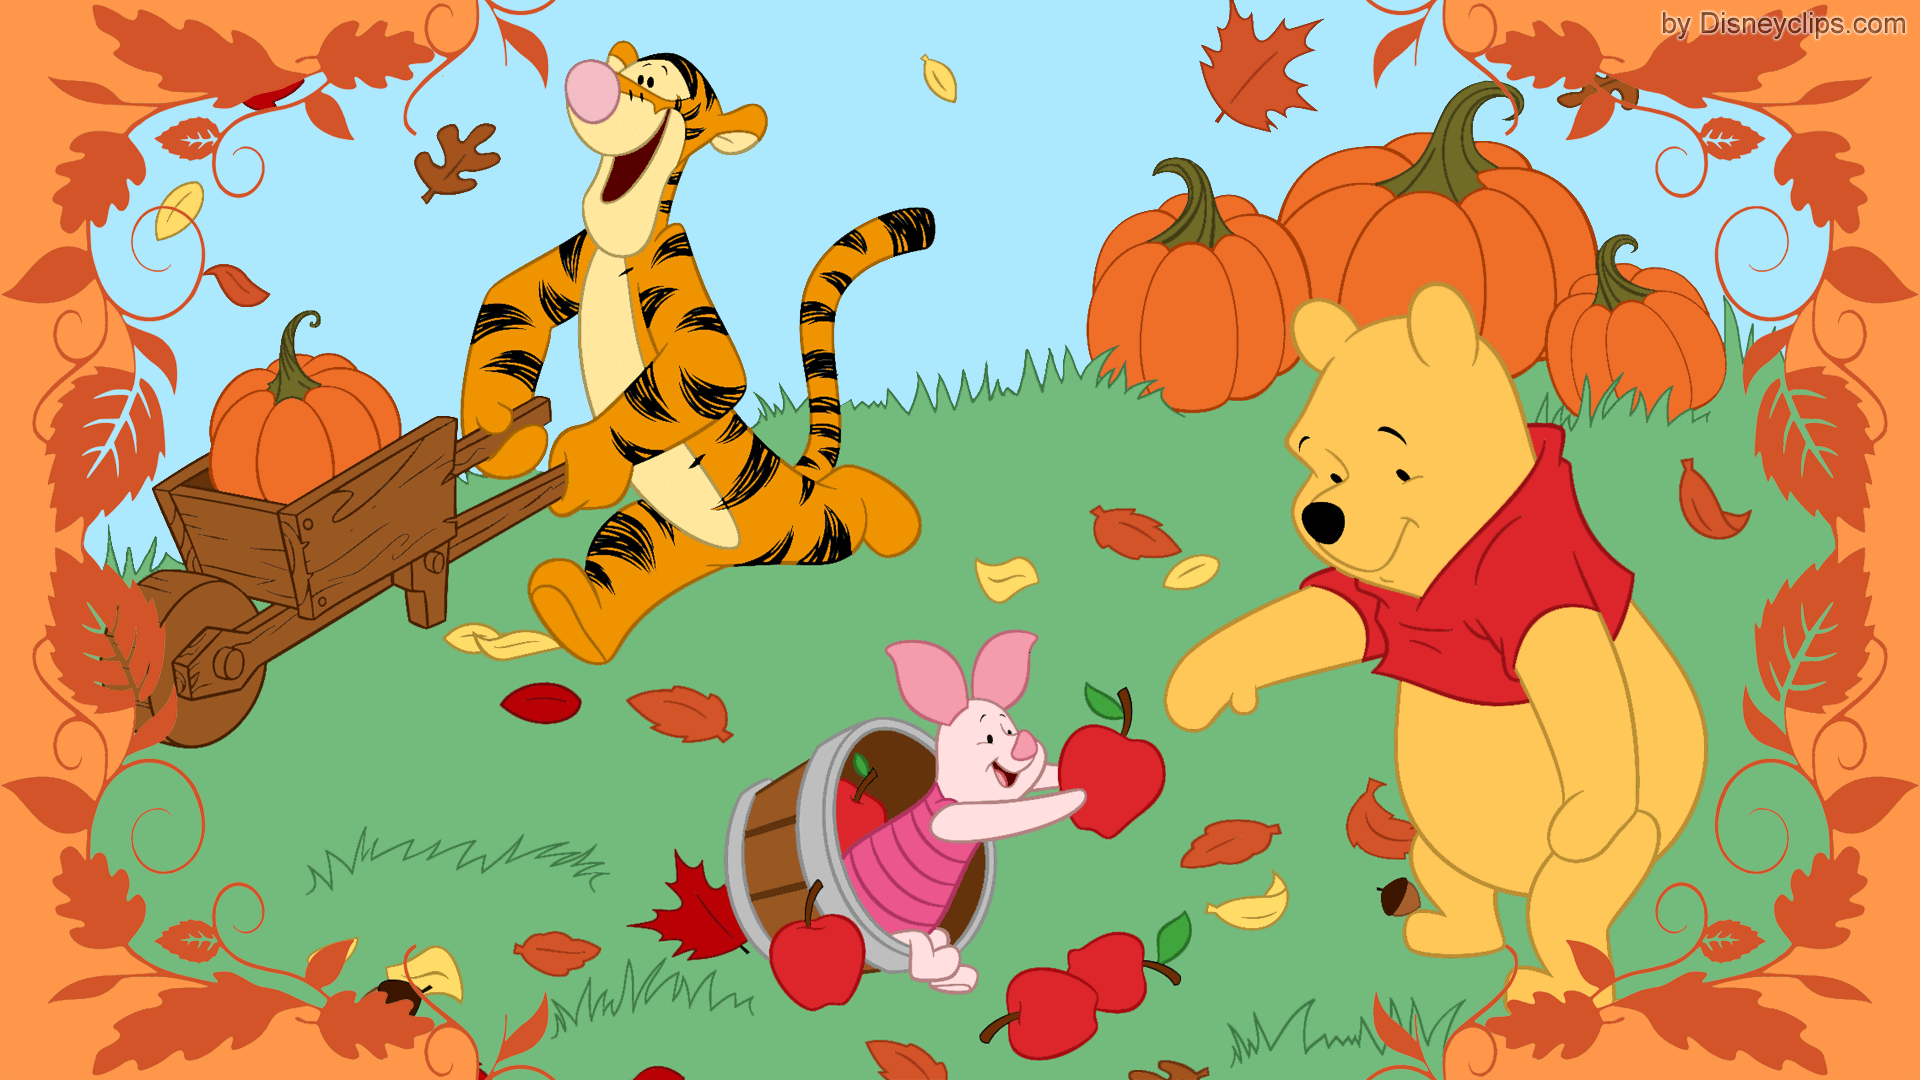 Winnie the Pooh Wallpapers.